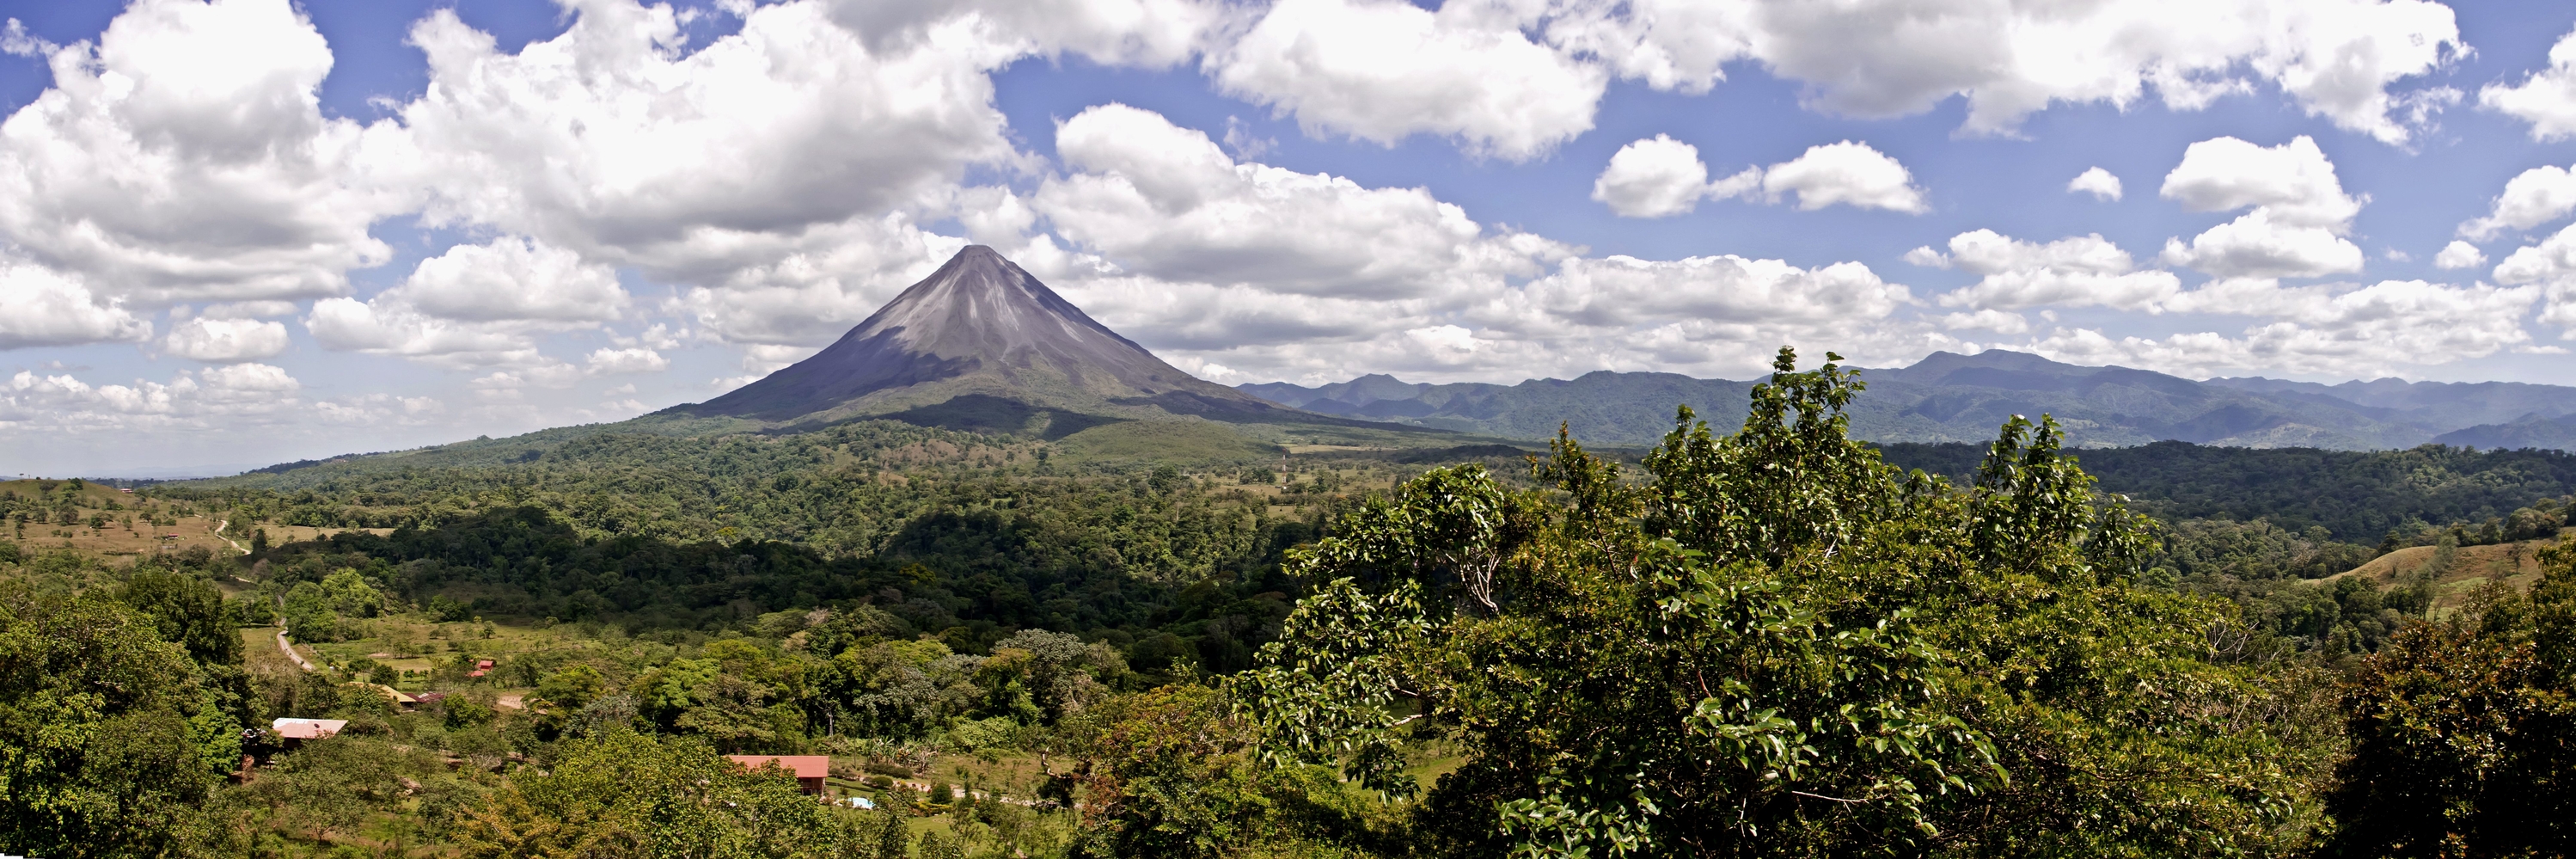 8-night Costa Rica escape with flights & hotels from $1,378